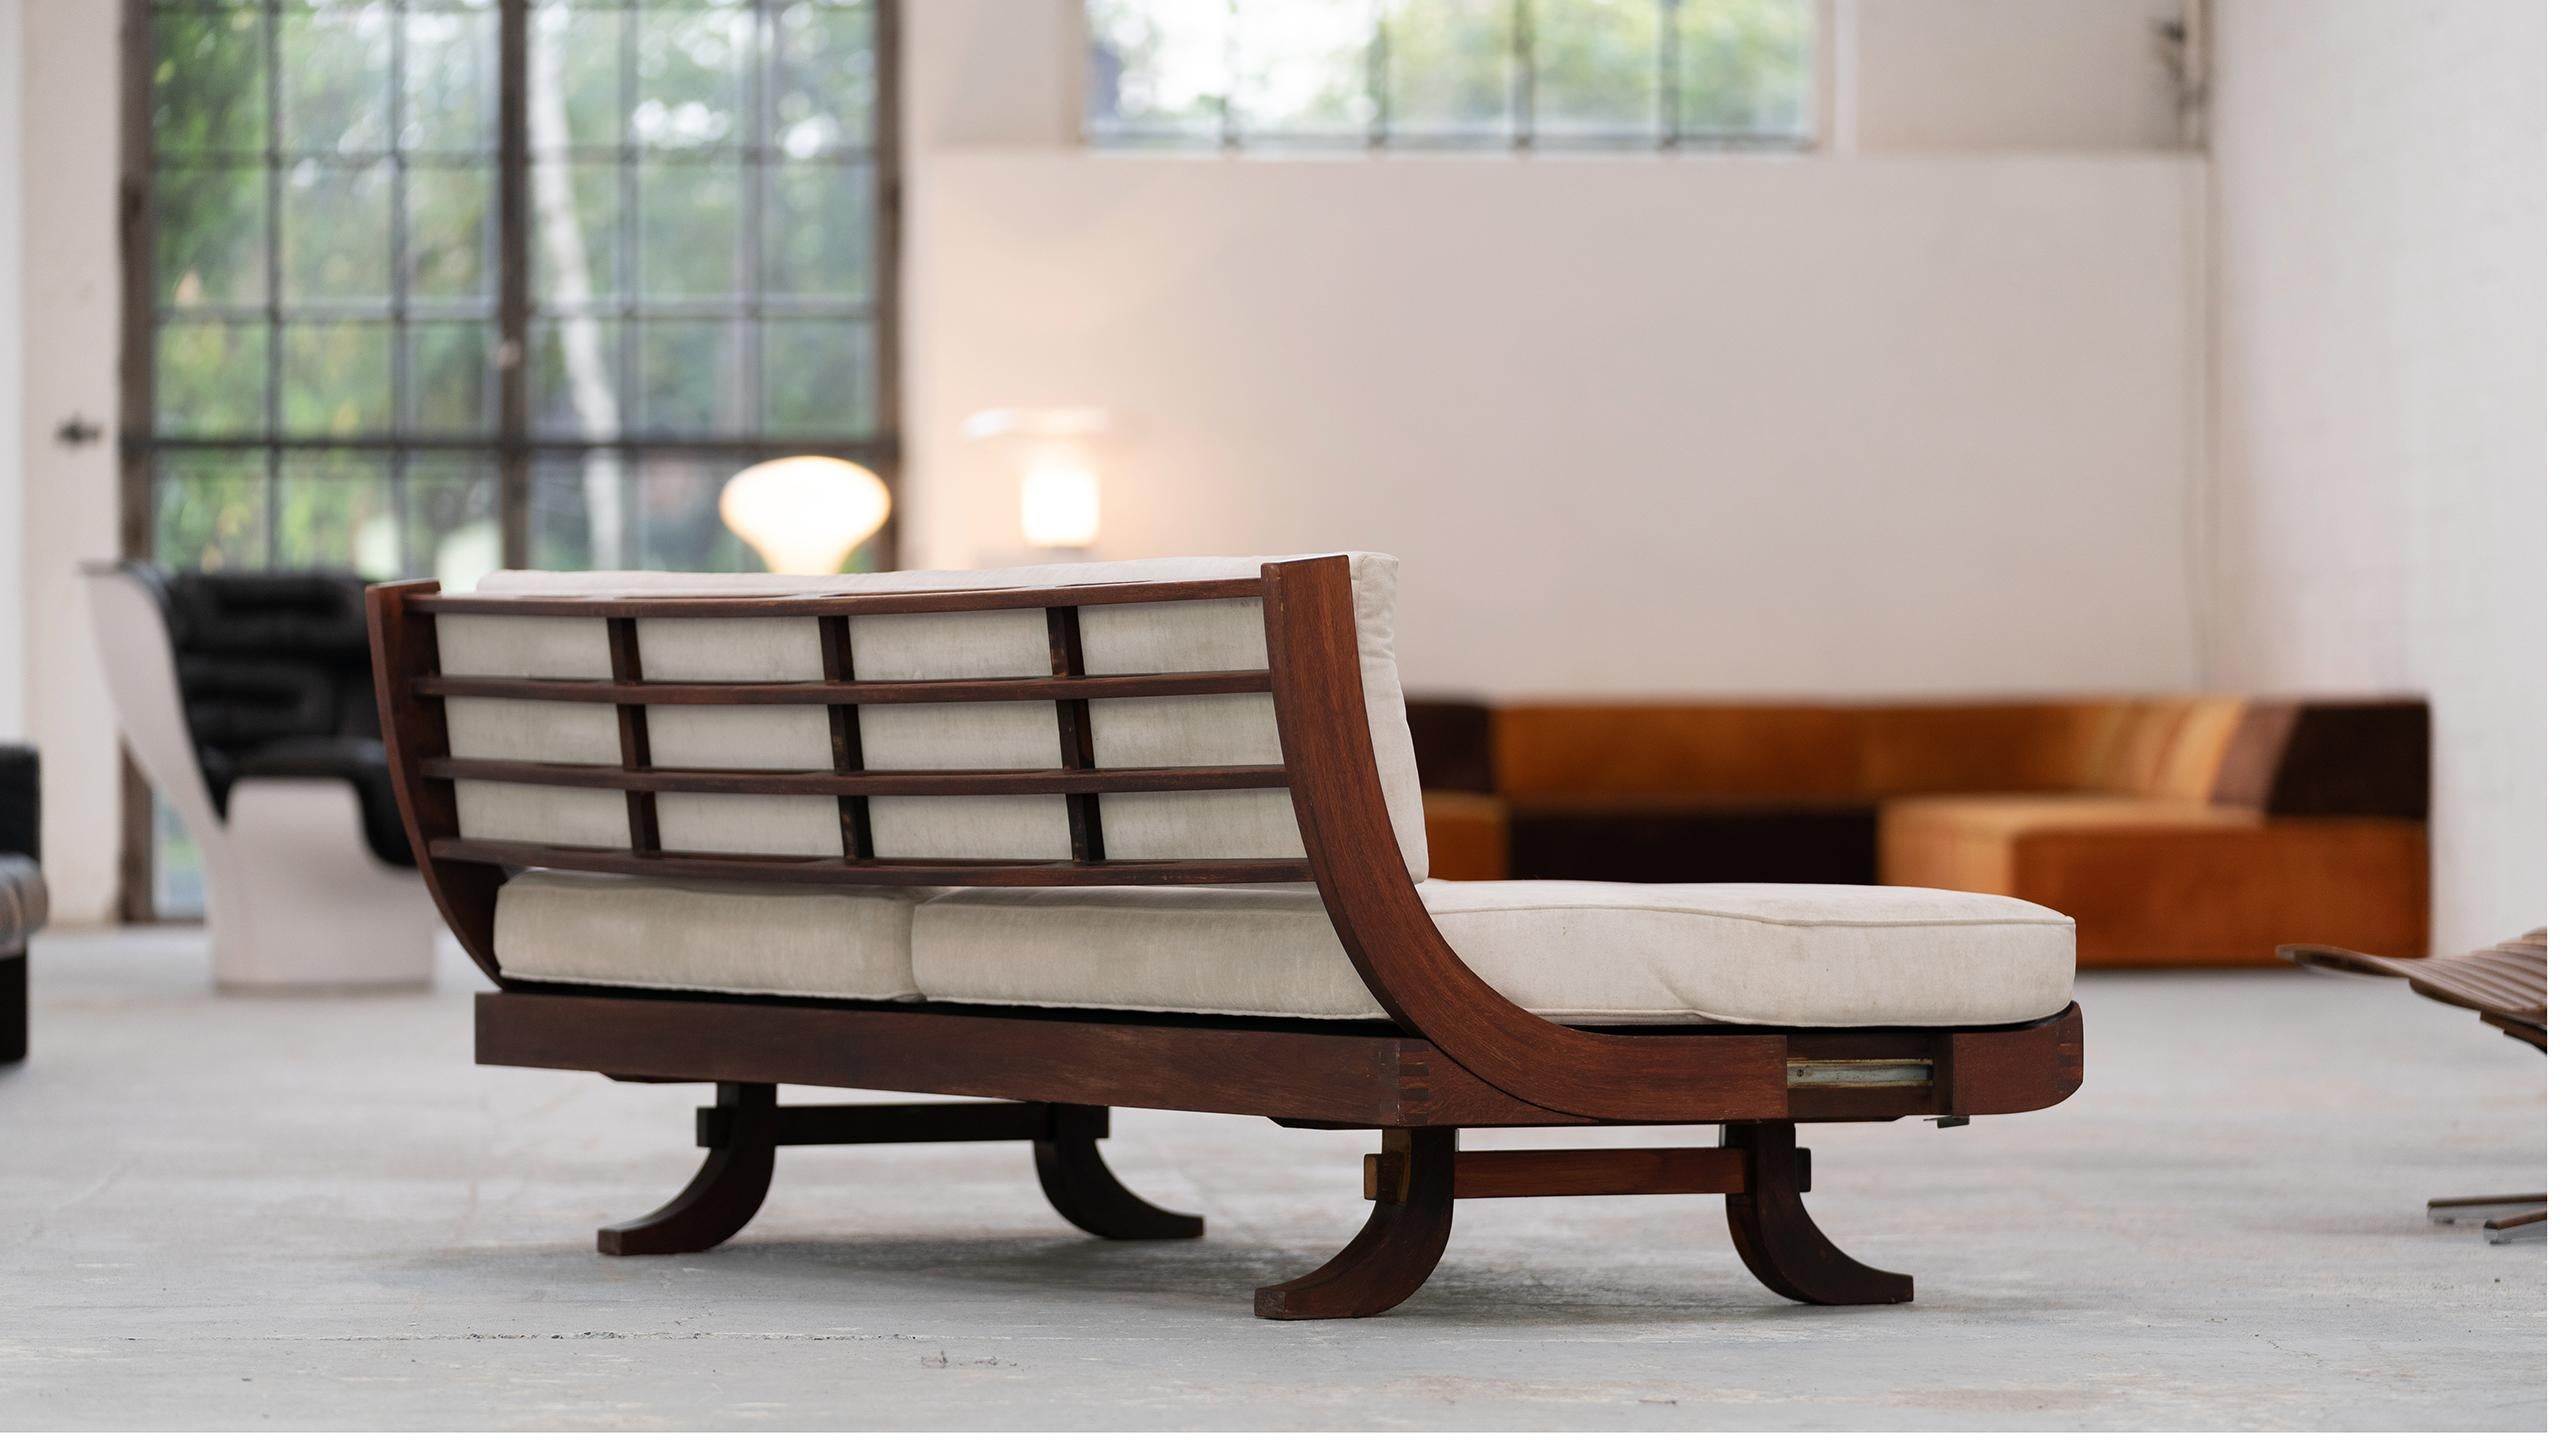 Brazilian Daybed & Sofa, 1966, Sophisticated Wood Details, Lounge & Relax 4